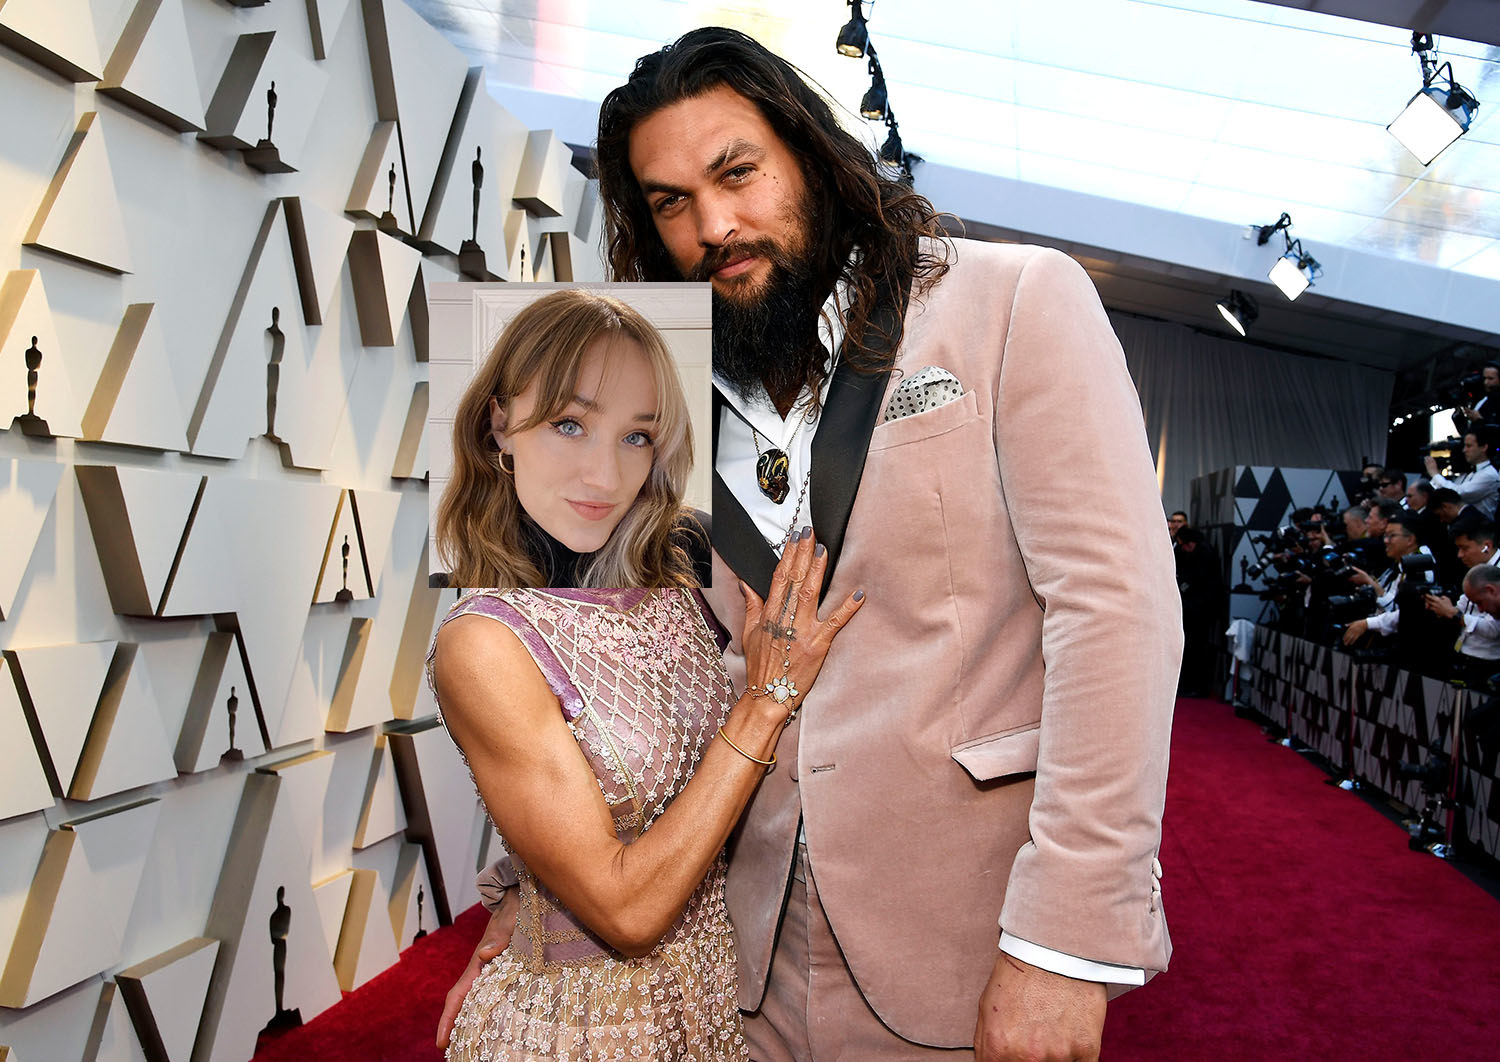 Jason posing with someone on the red carpet, but the writer&#x27;s face has been Photoshopped over the other person